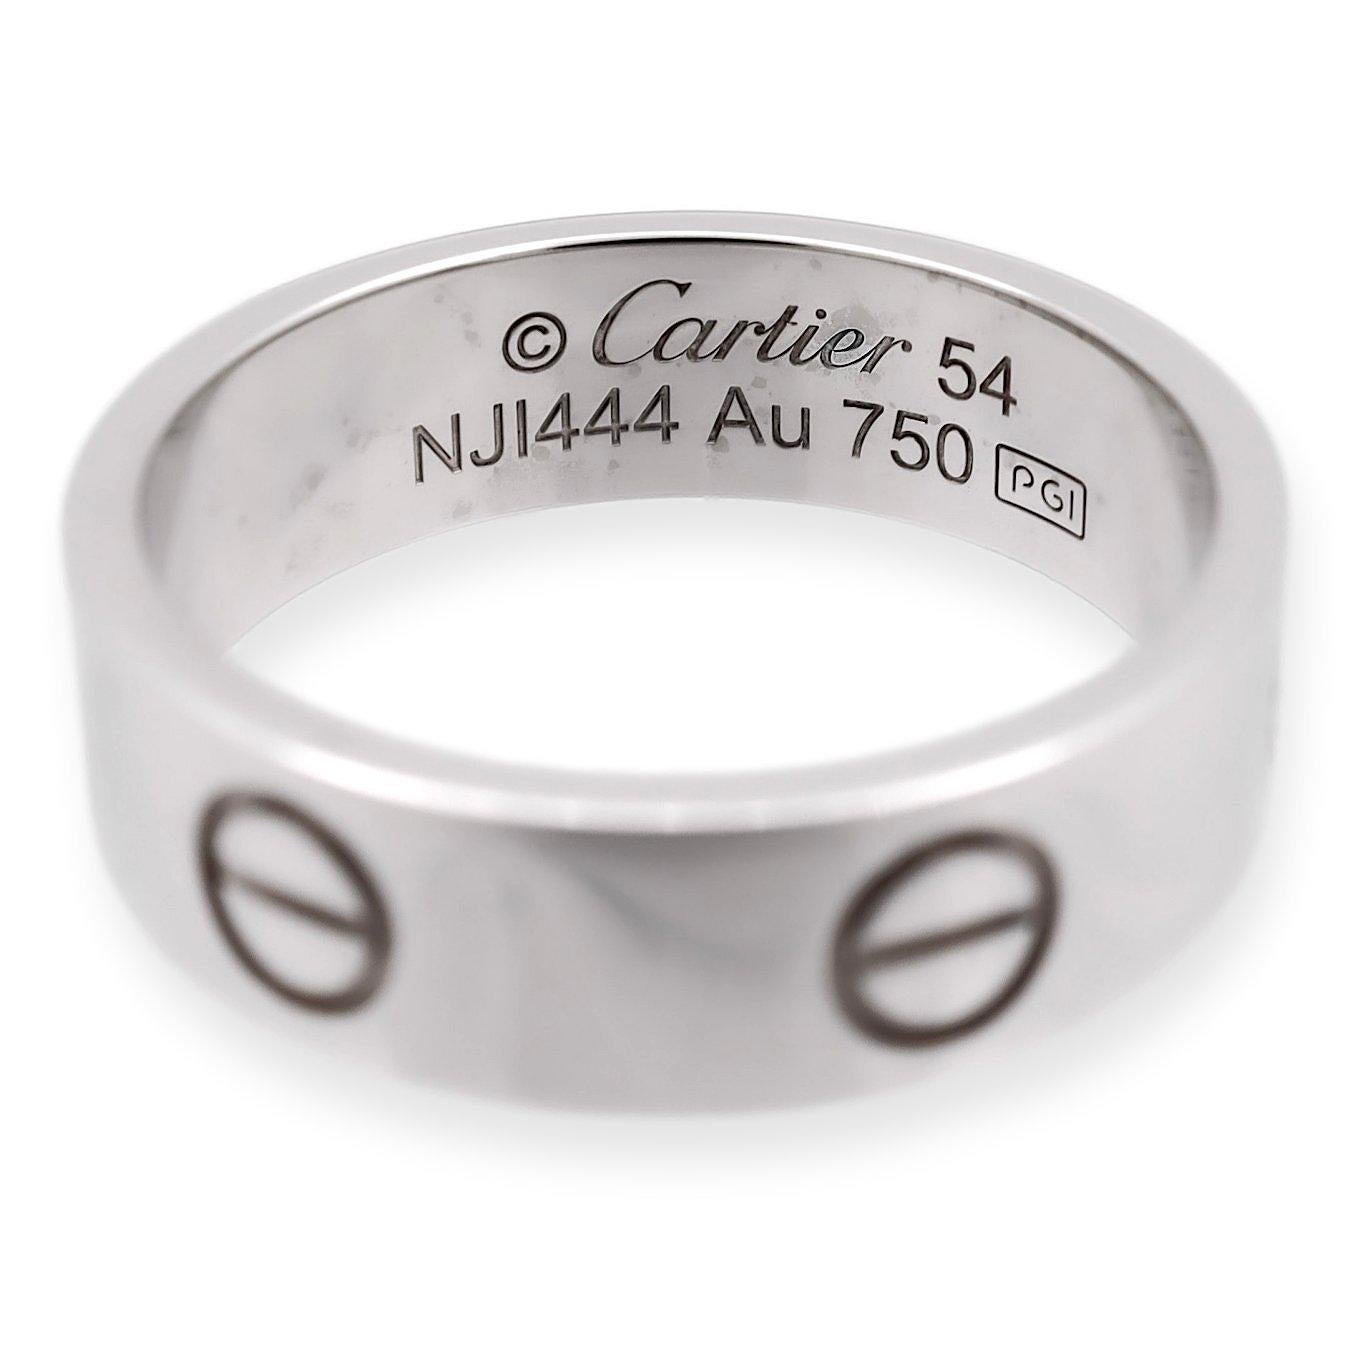 Cartier Love 18K White Gold 5.5mm Size 54 (US6.75) Band Ring In Good Condition For Sale In New York, NY